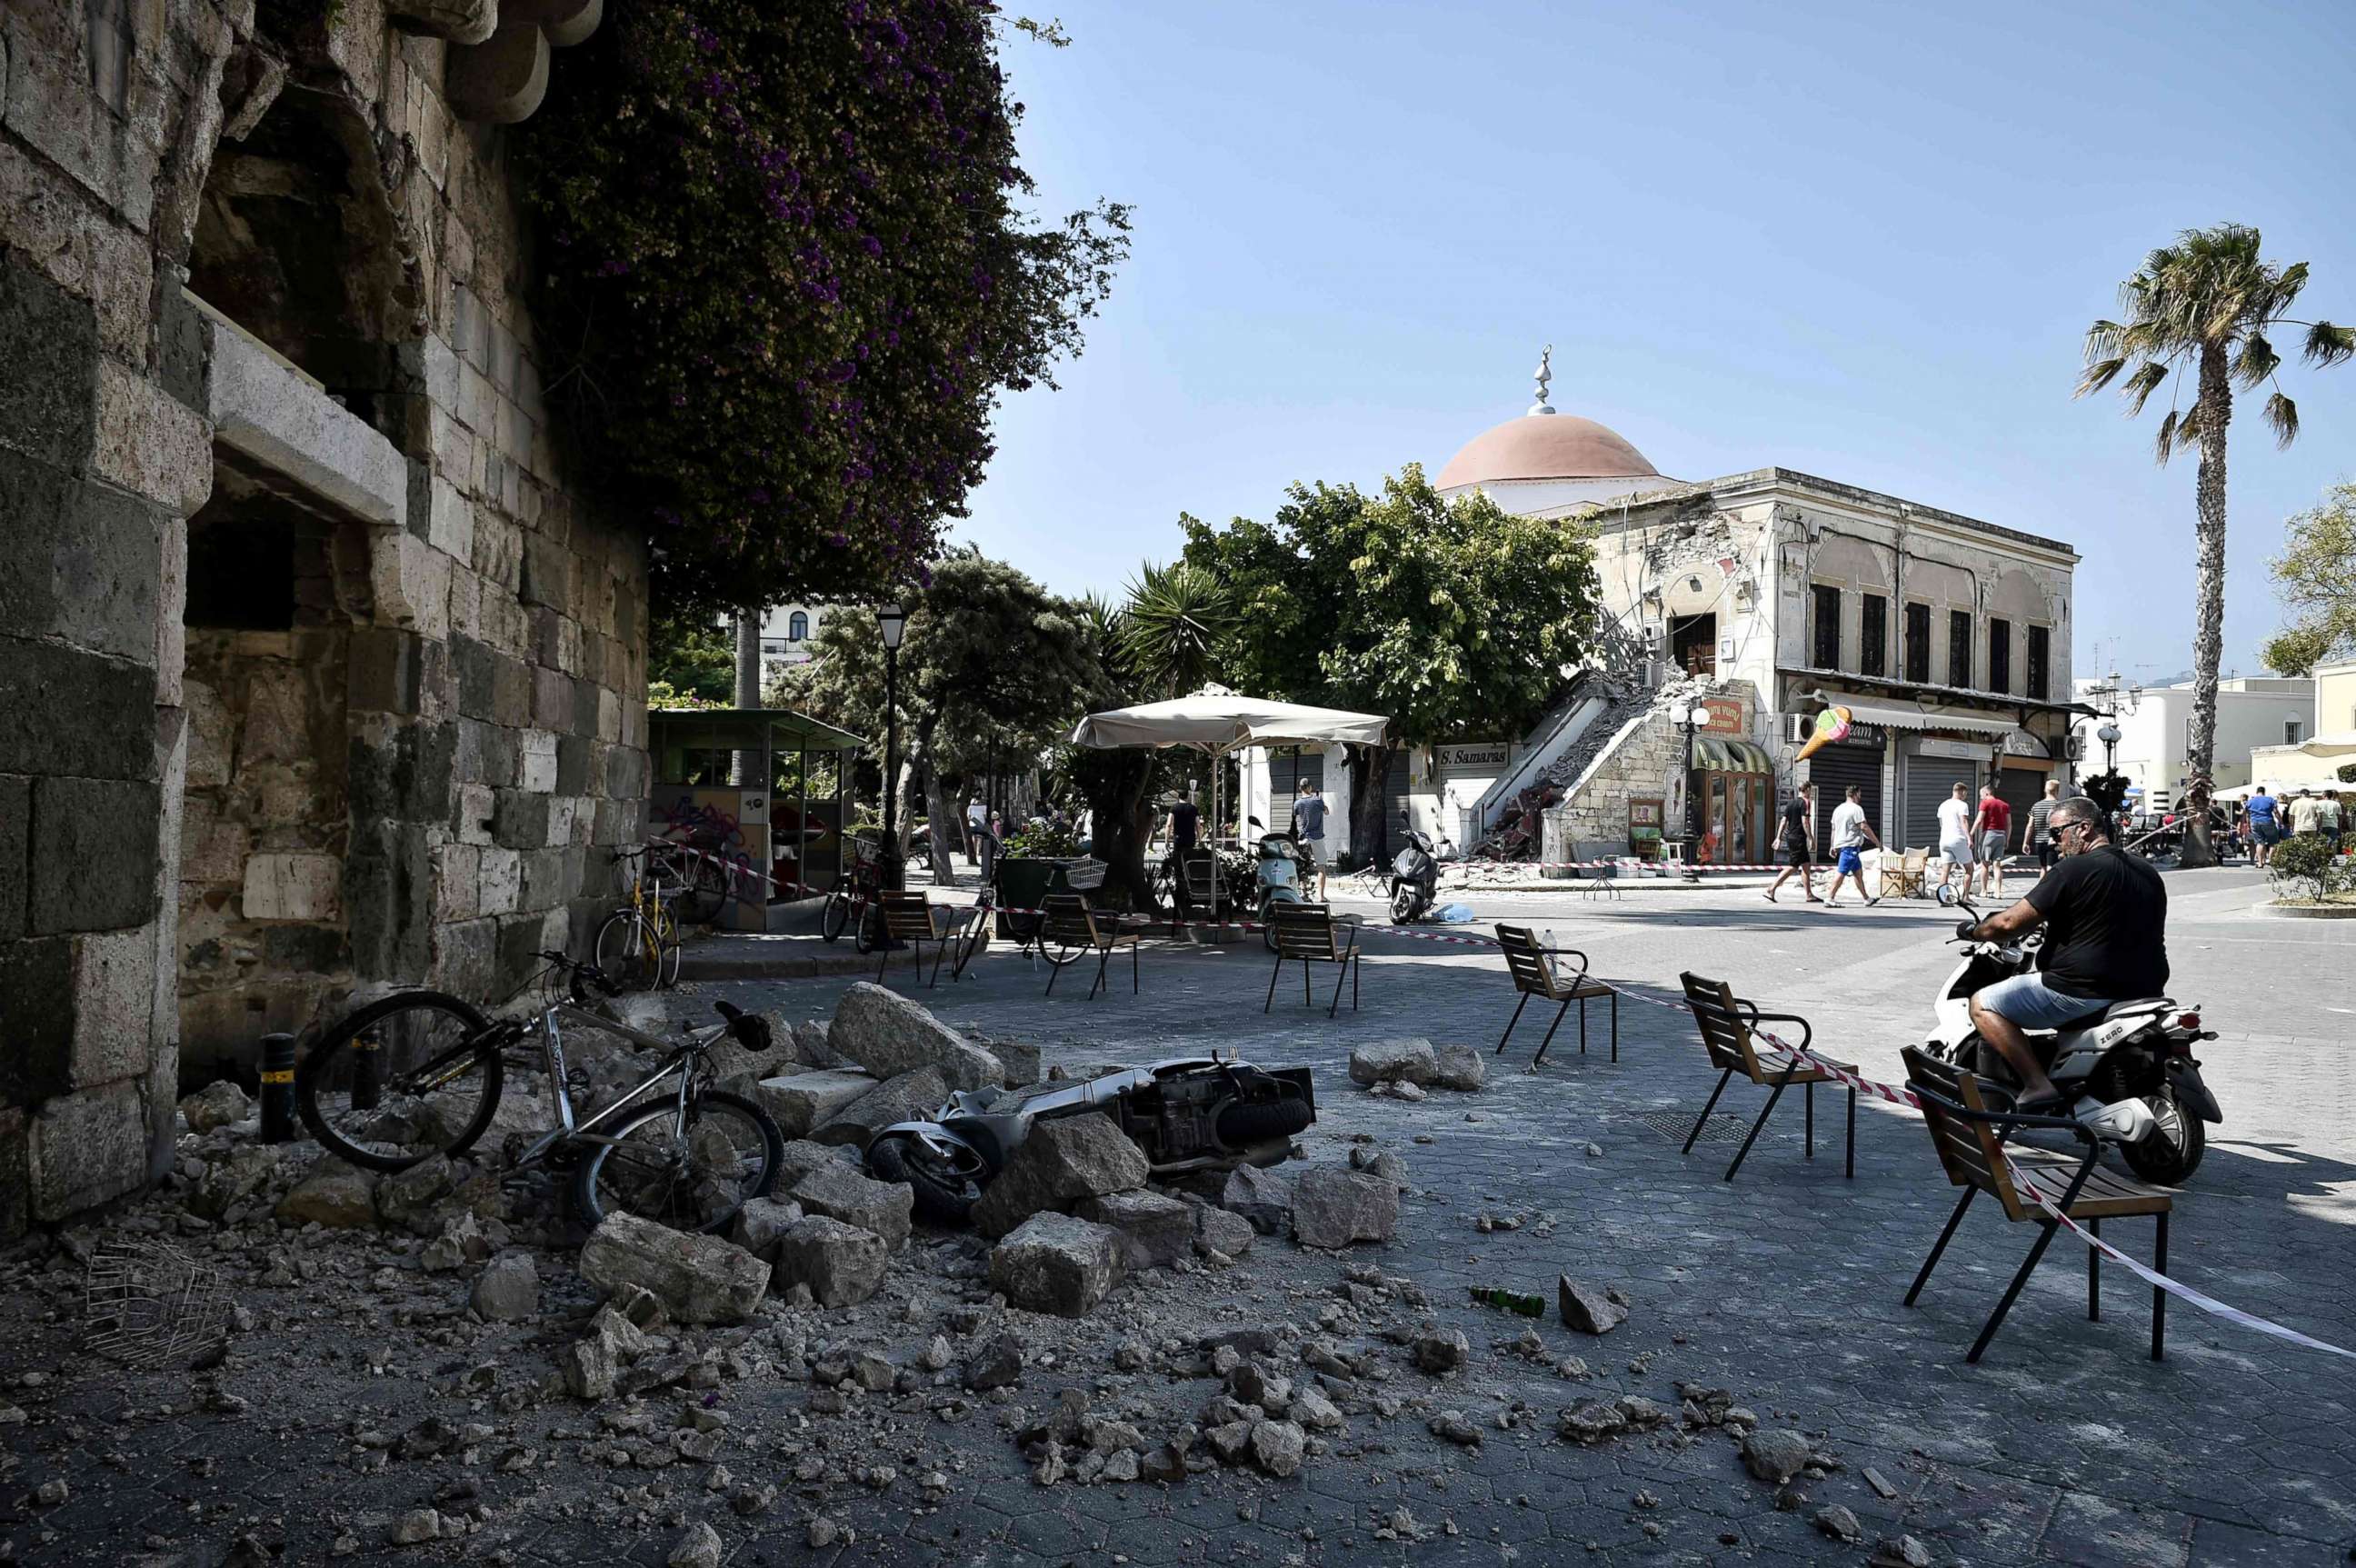 PHOTO: A man looks at rubble fallen from a quake damaged building on the Greek Island of Kos, July 21, 2017, following a 6.5 magnitude earthquake which struck the region.